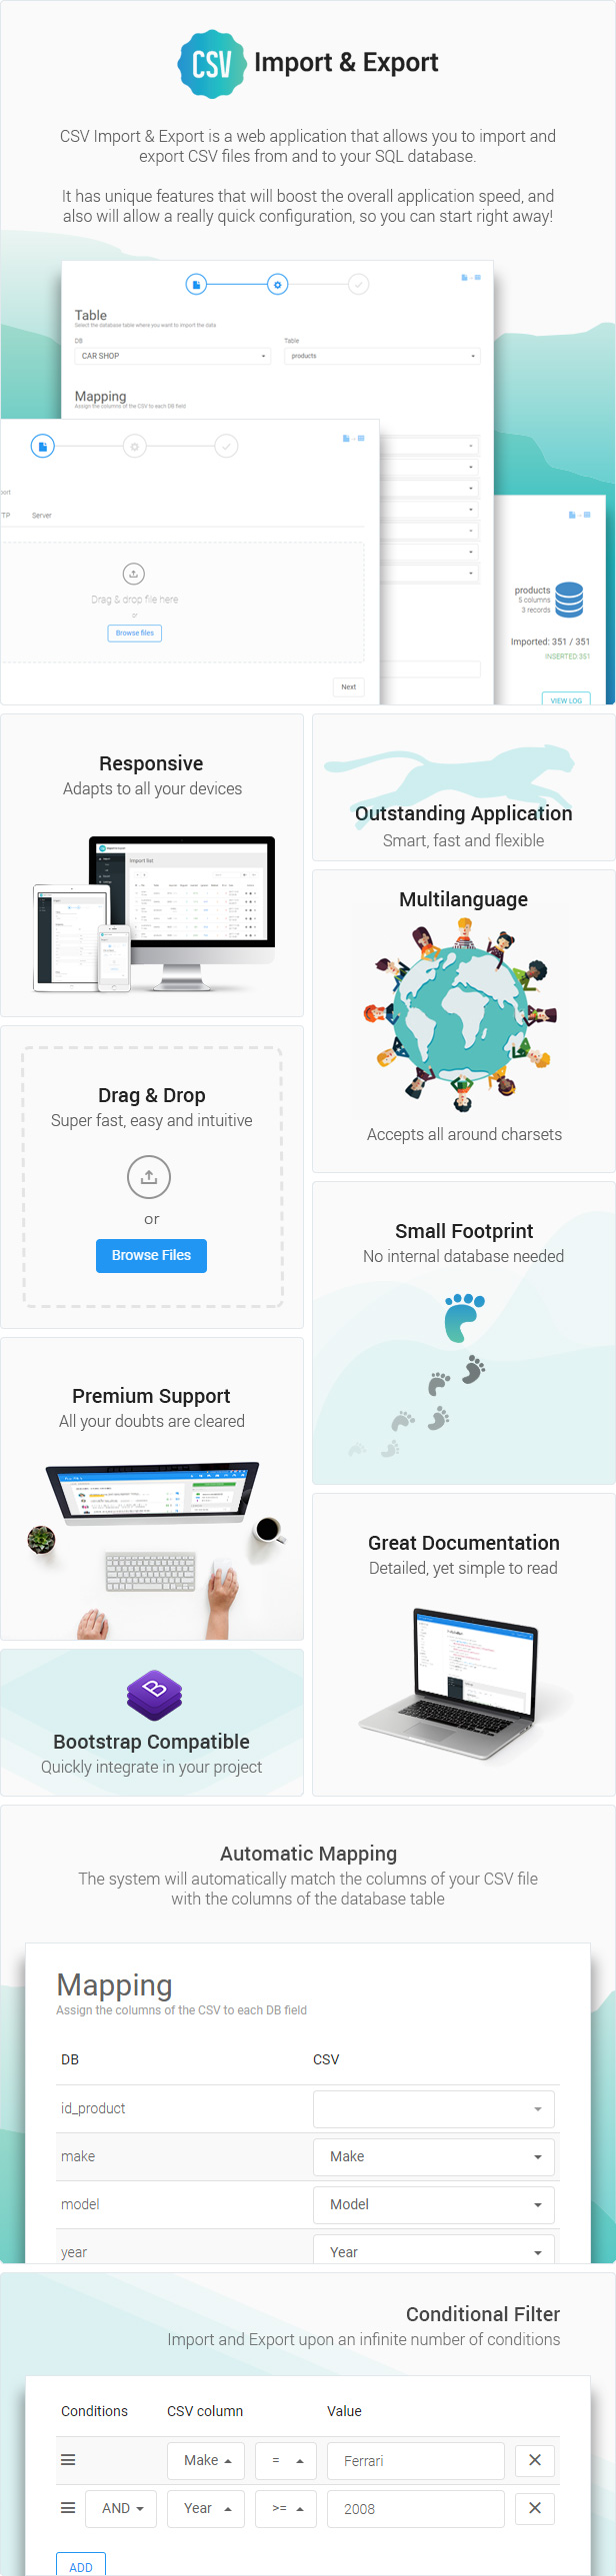 CSV Import & Export - The easiest and the fastest import & export application on the web!